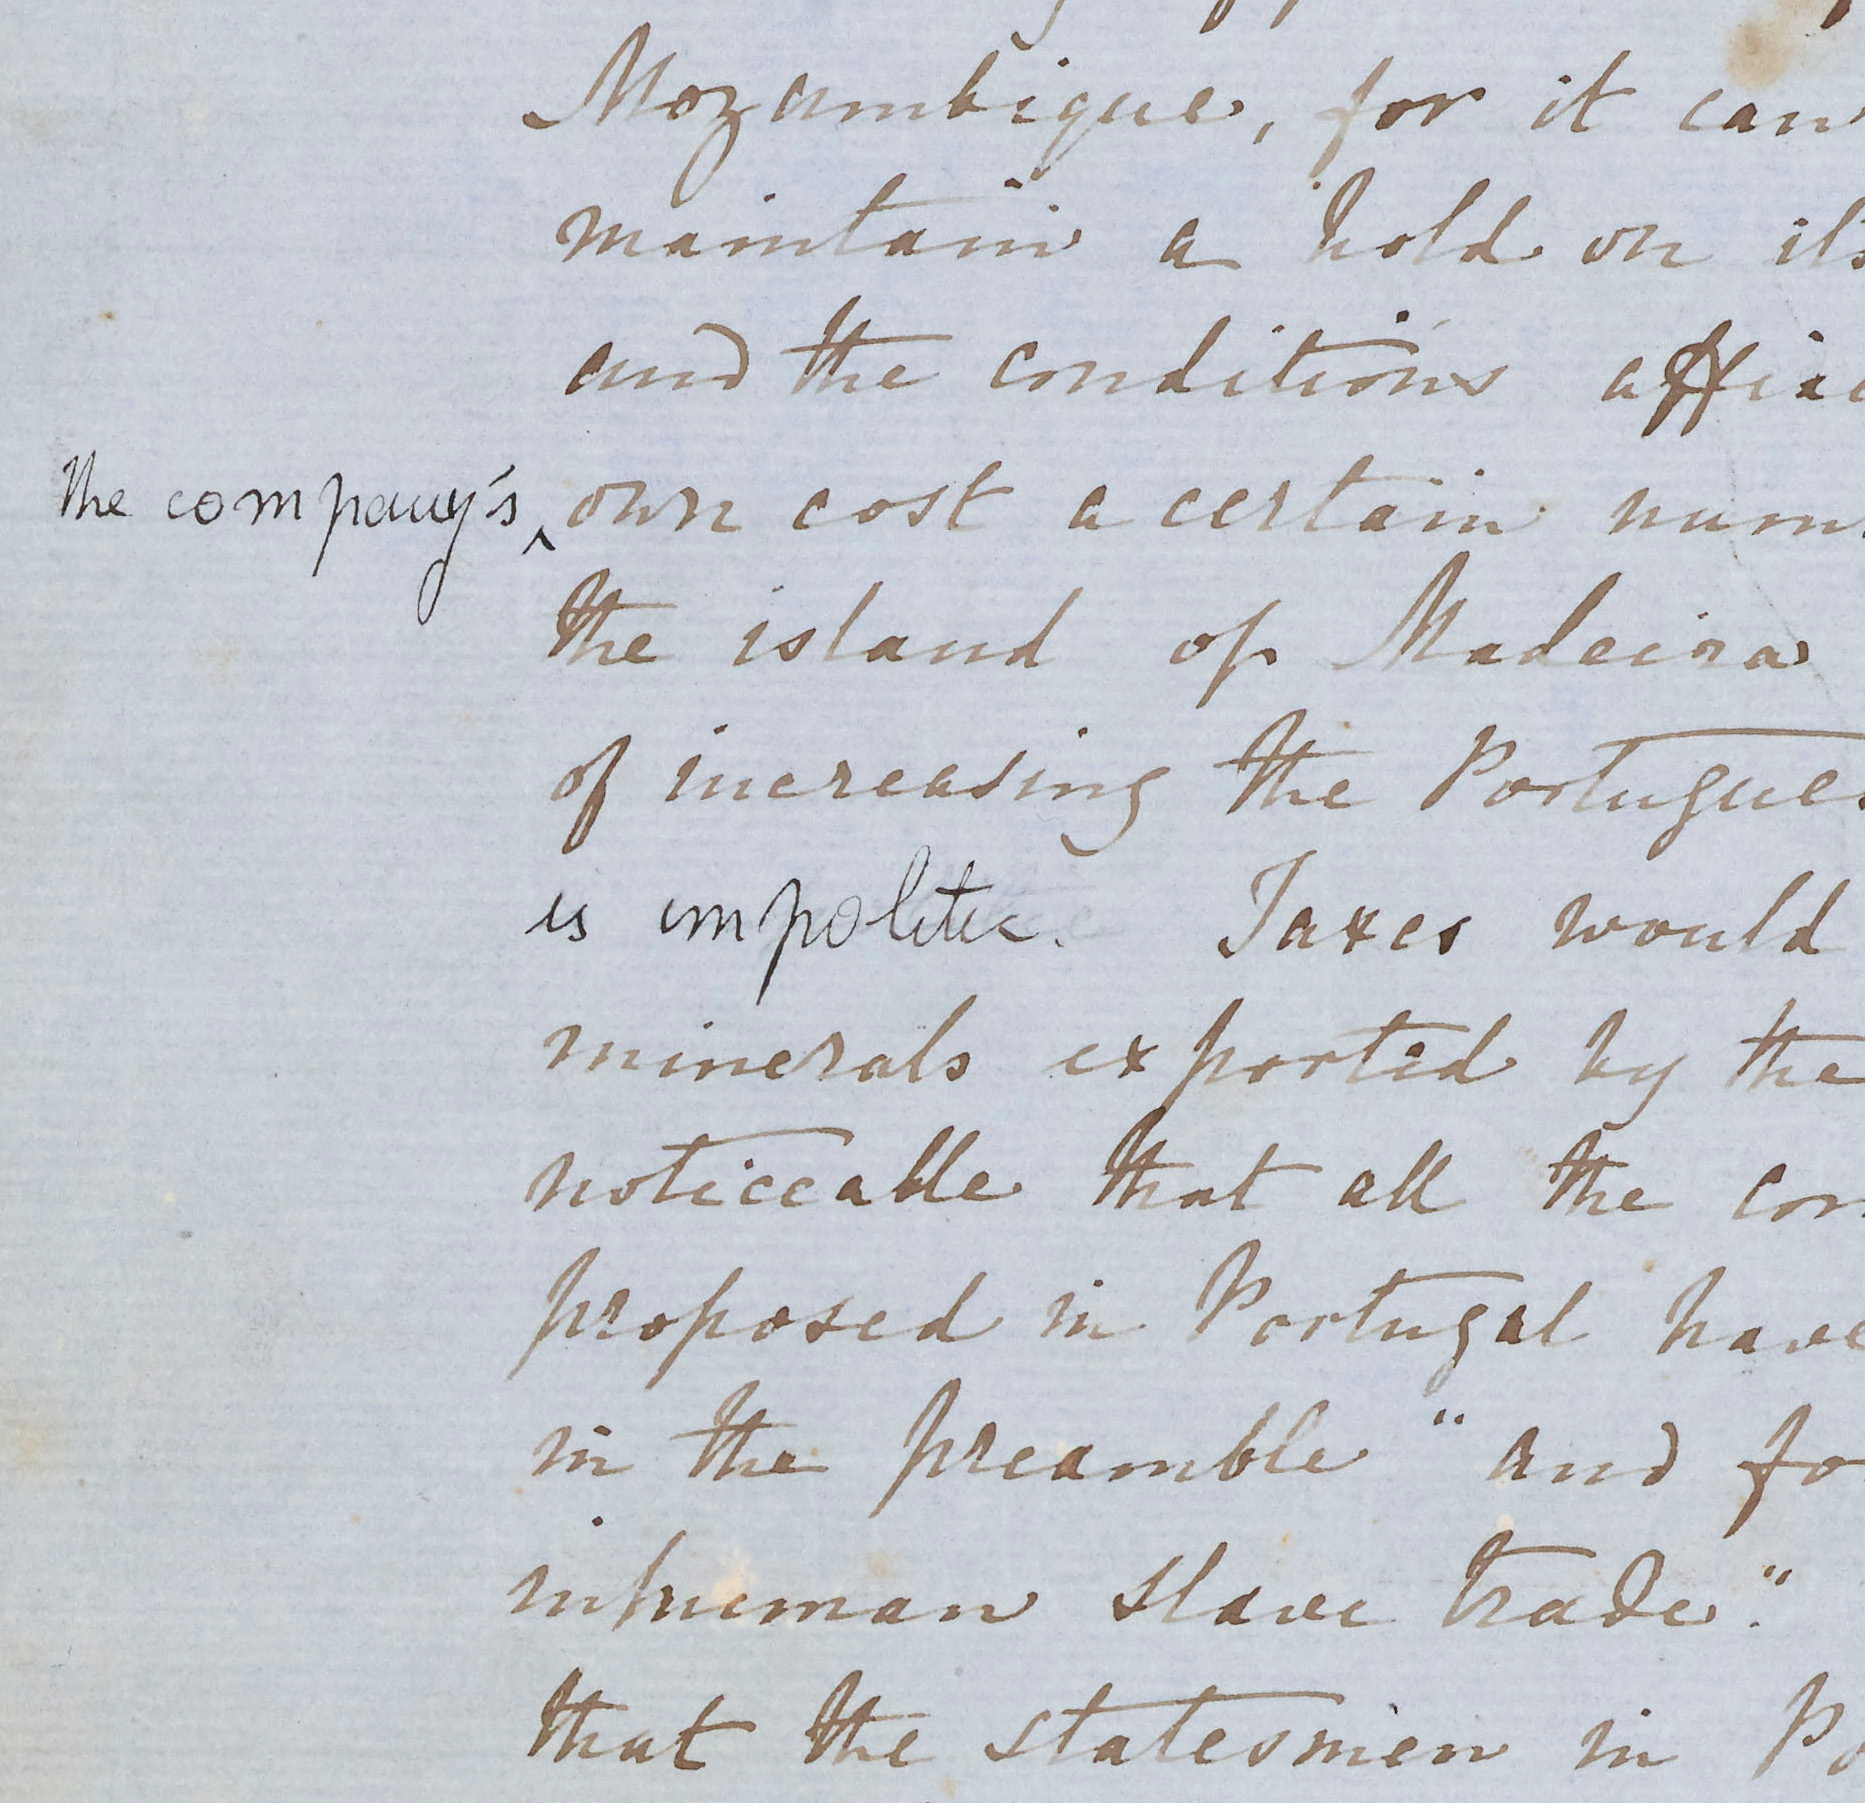 Image of a page segment from the Missionary Travels manuscript (Livingstone 1857dd:[252]), detail. Copyright National Library of Scotland. Creative Commons Share-alike 2.5 UK: Scotland (https://creativecommons.org/licenses/by-nc-sa/2.5/scotland/).